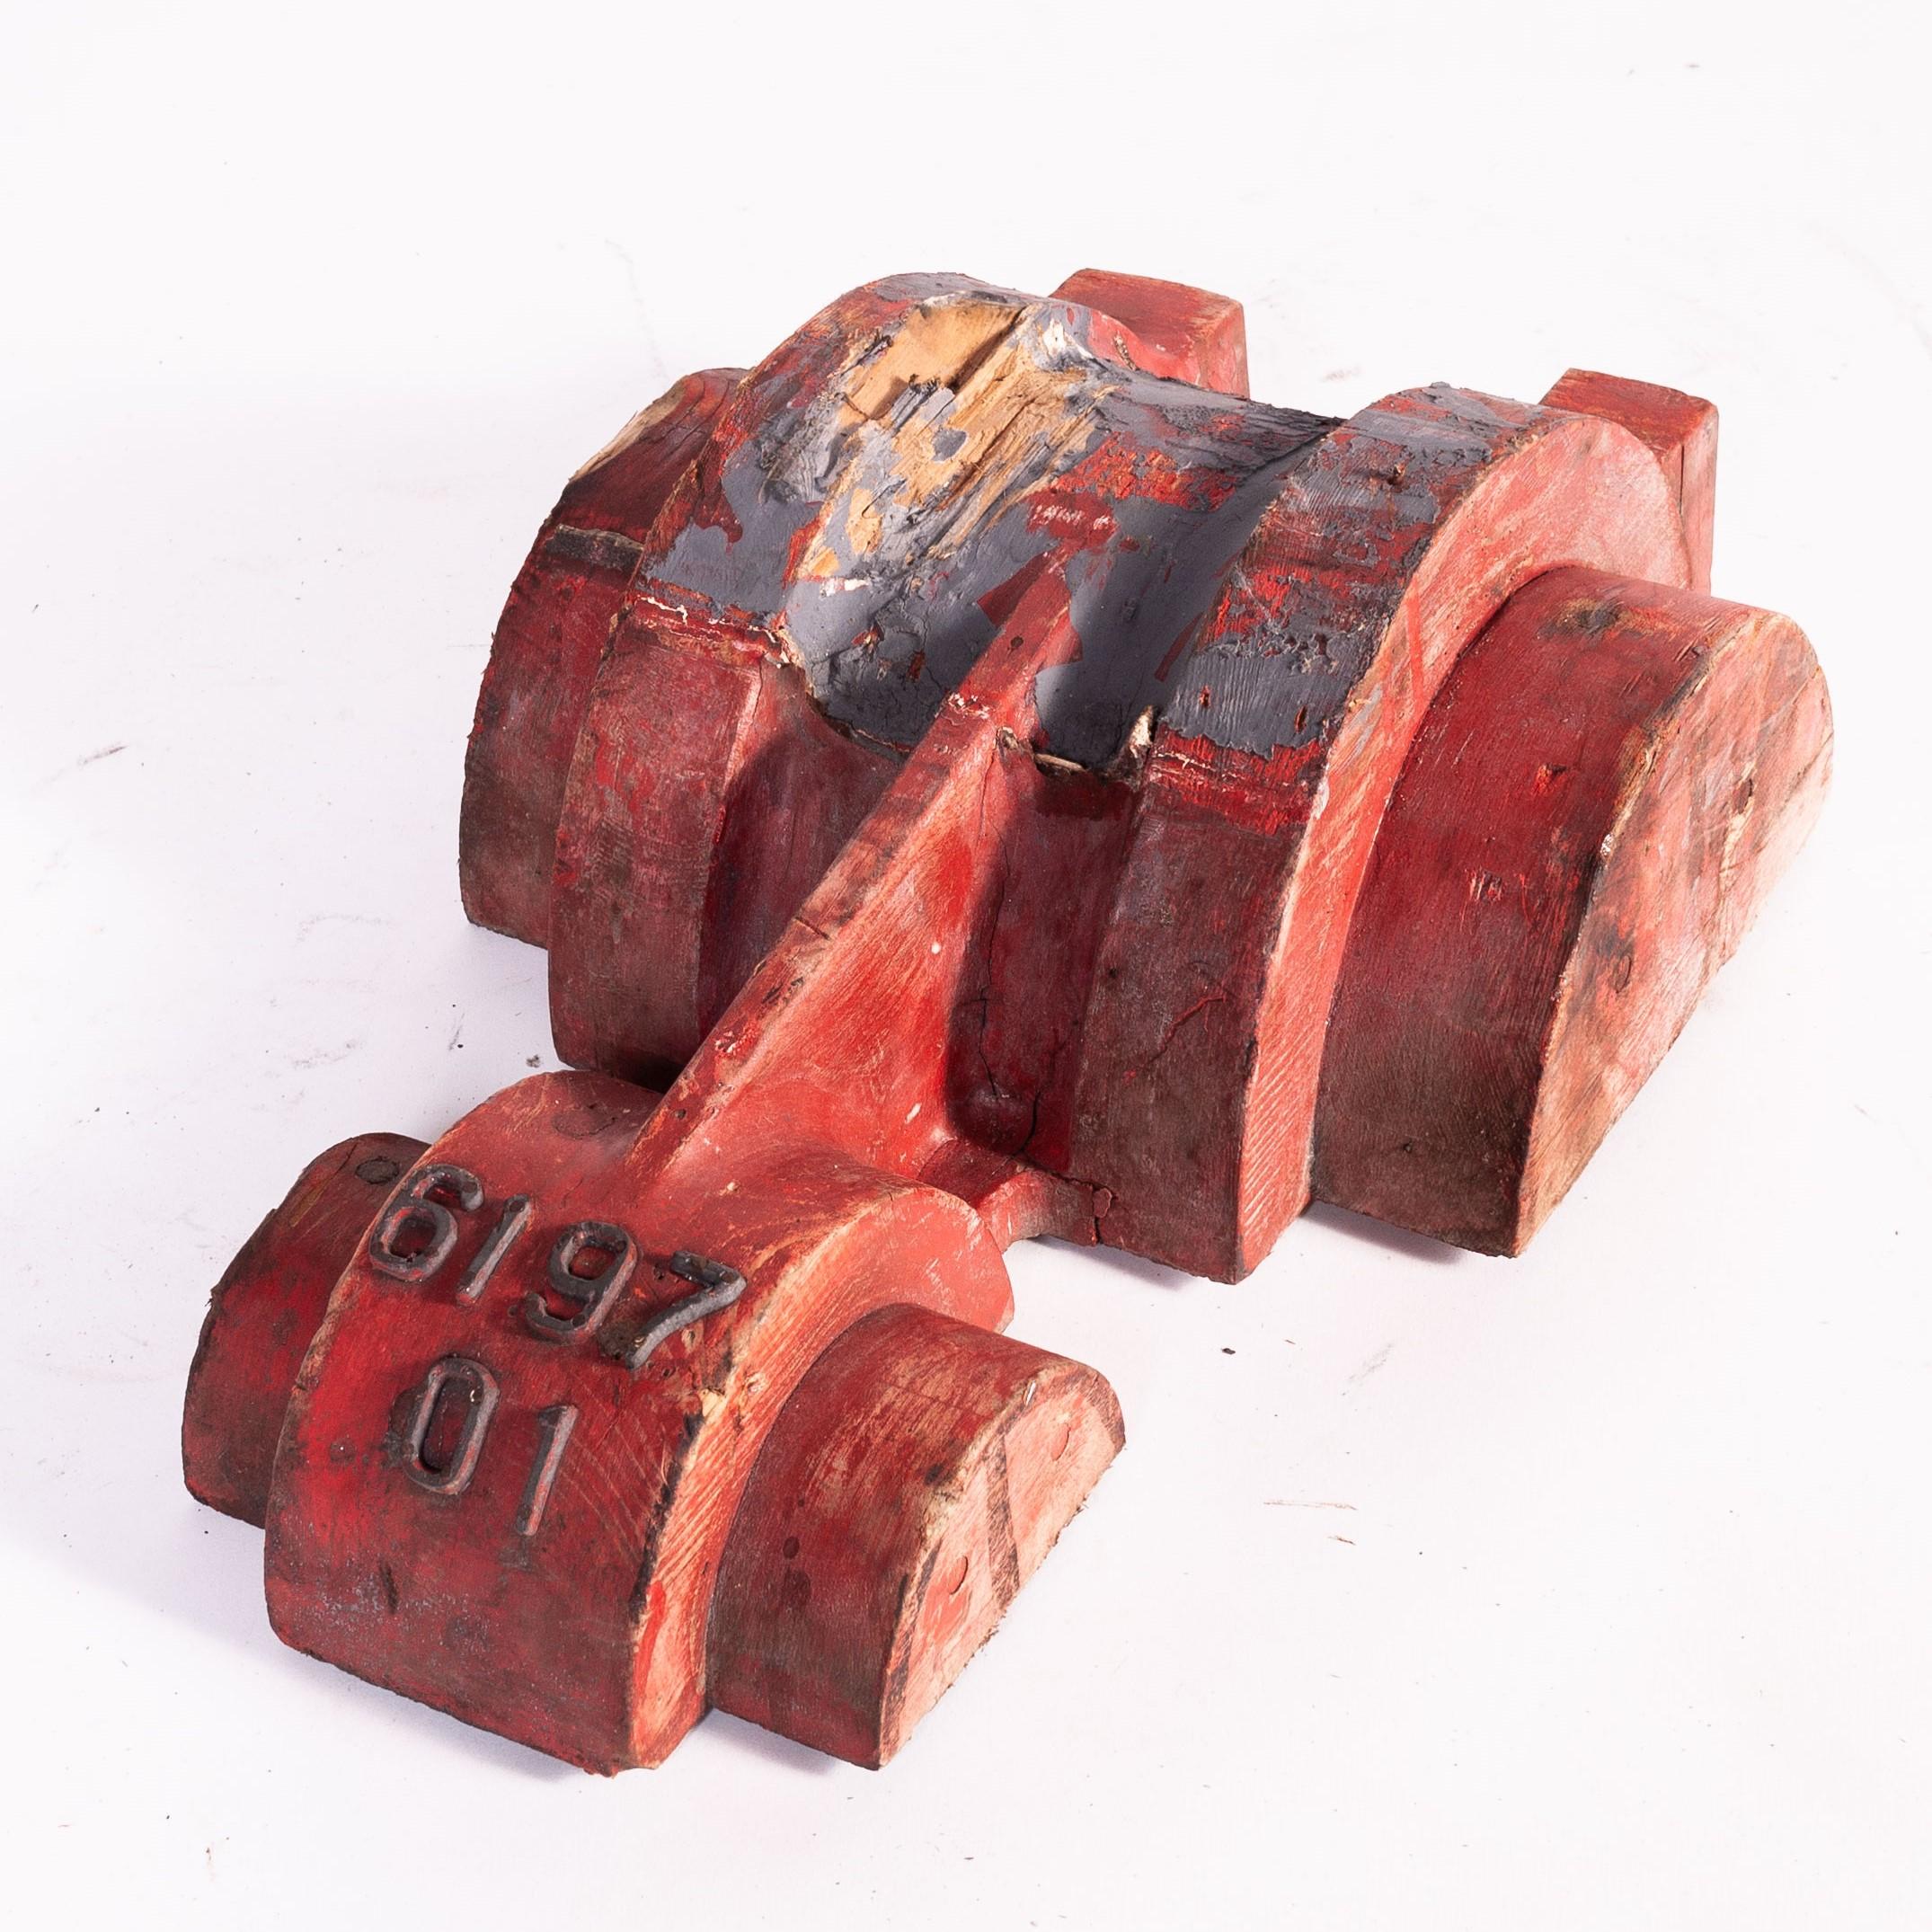 1960s Industrial decorative foundry casting Mould
1960s vintage Industrial decorative foundry casting mould. These amazing sculptural pieces are the ‘male’ form used to form the ‘female’ shape in the process of sand casting. Each one is handcut and